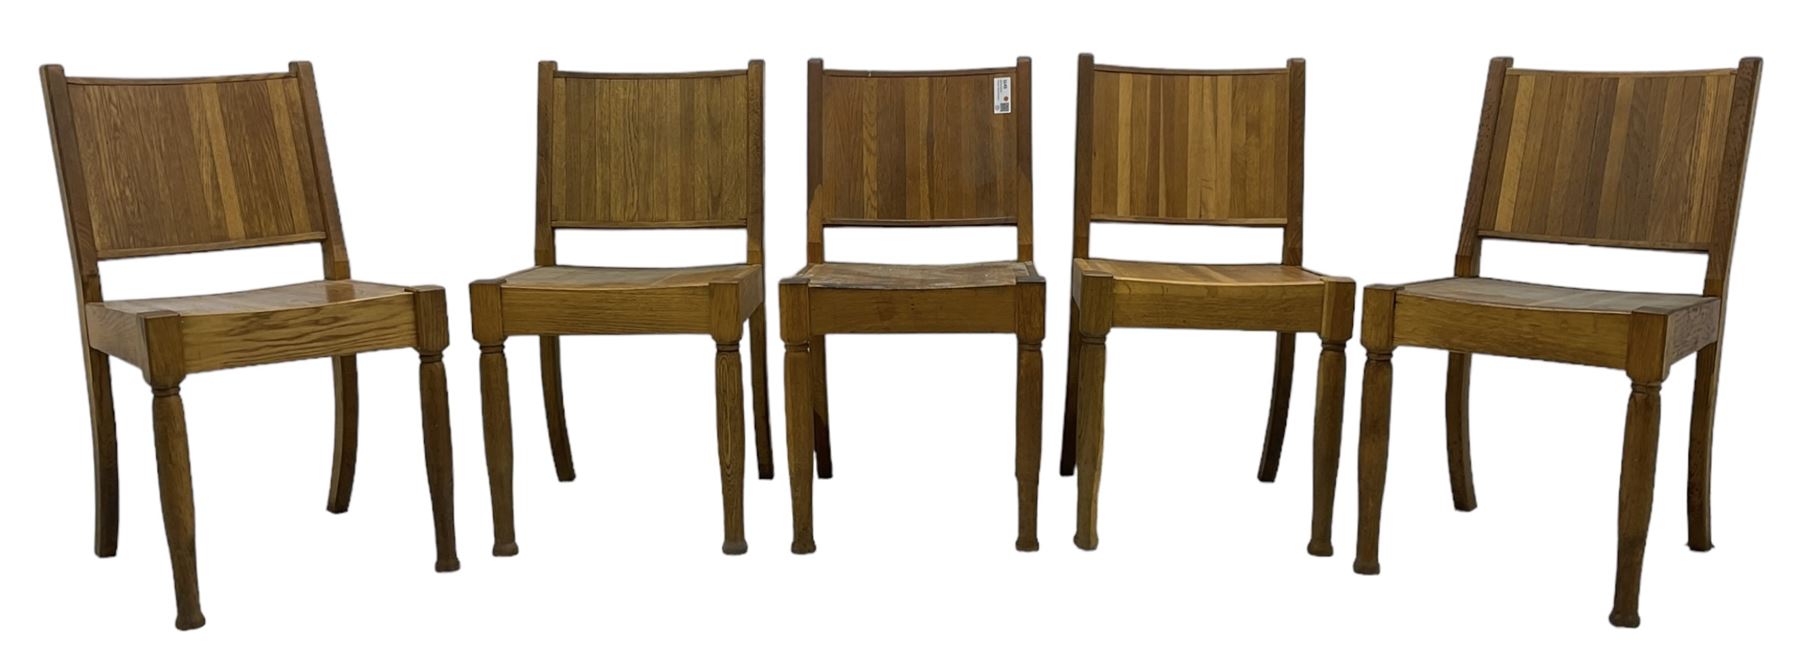 Set of five 20th century oak chairs